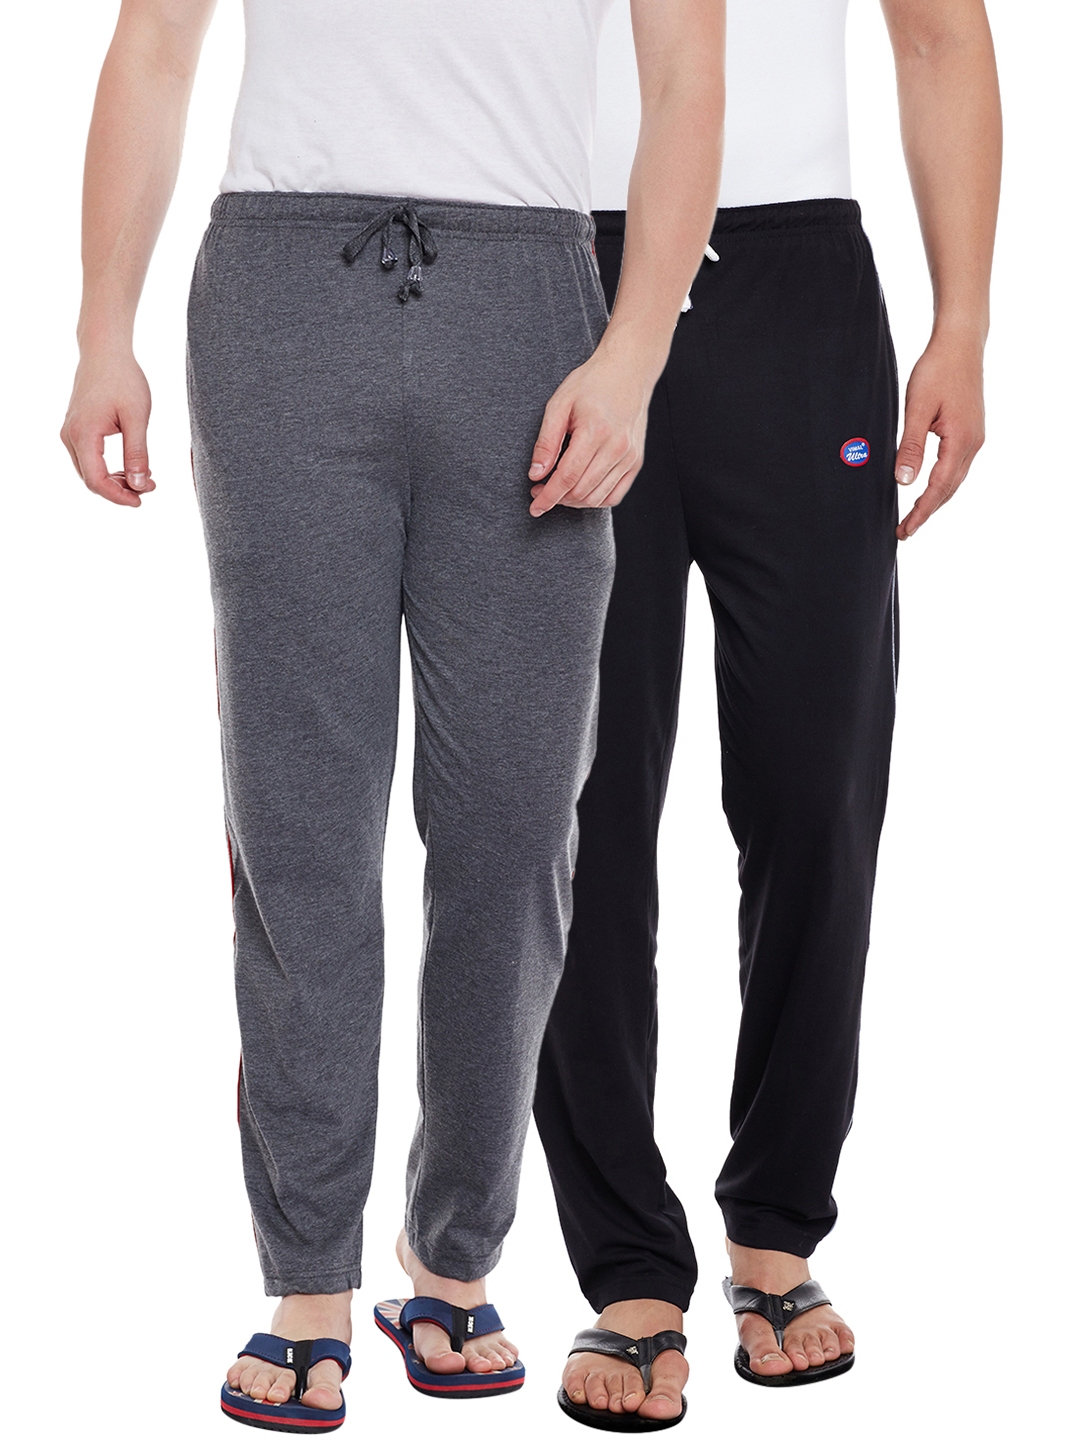 Only Vimal Apparel Trousers  Buy Only Vimal Apparel Trousers Online In  India